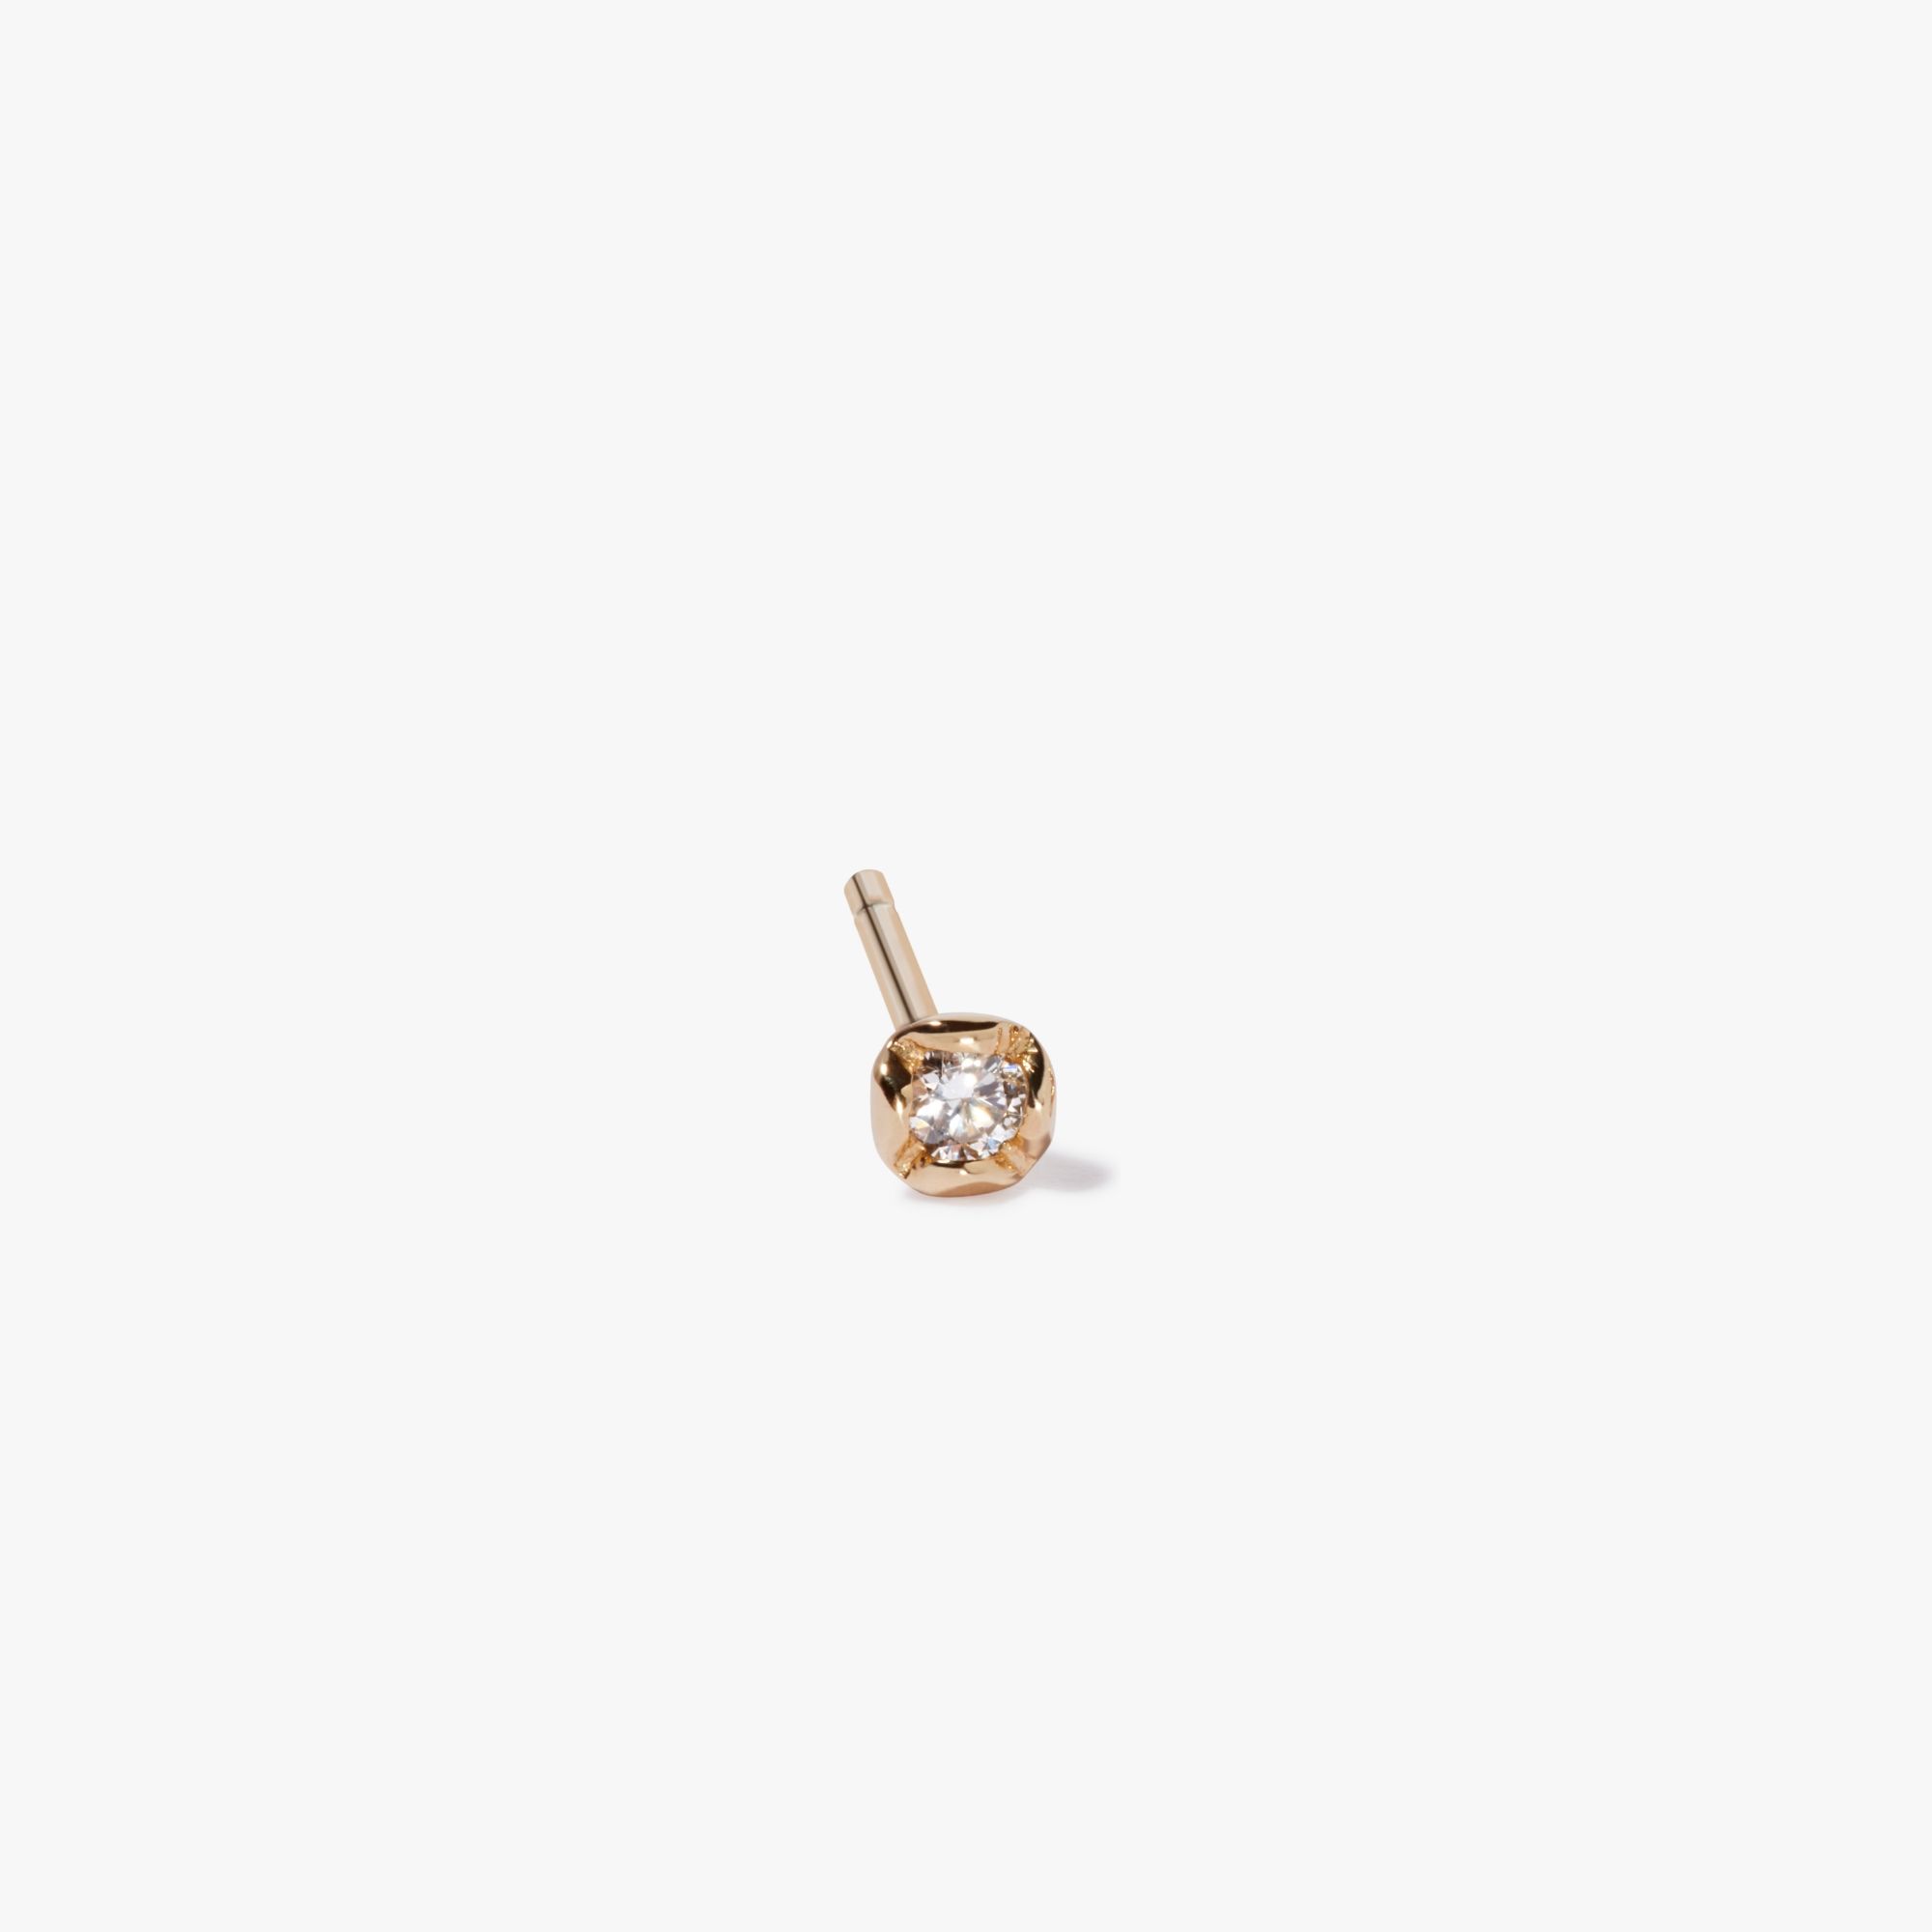 Whoopsie Daisy Small Solitaire Stud Earring